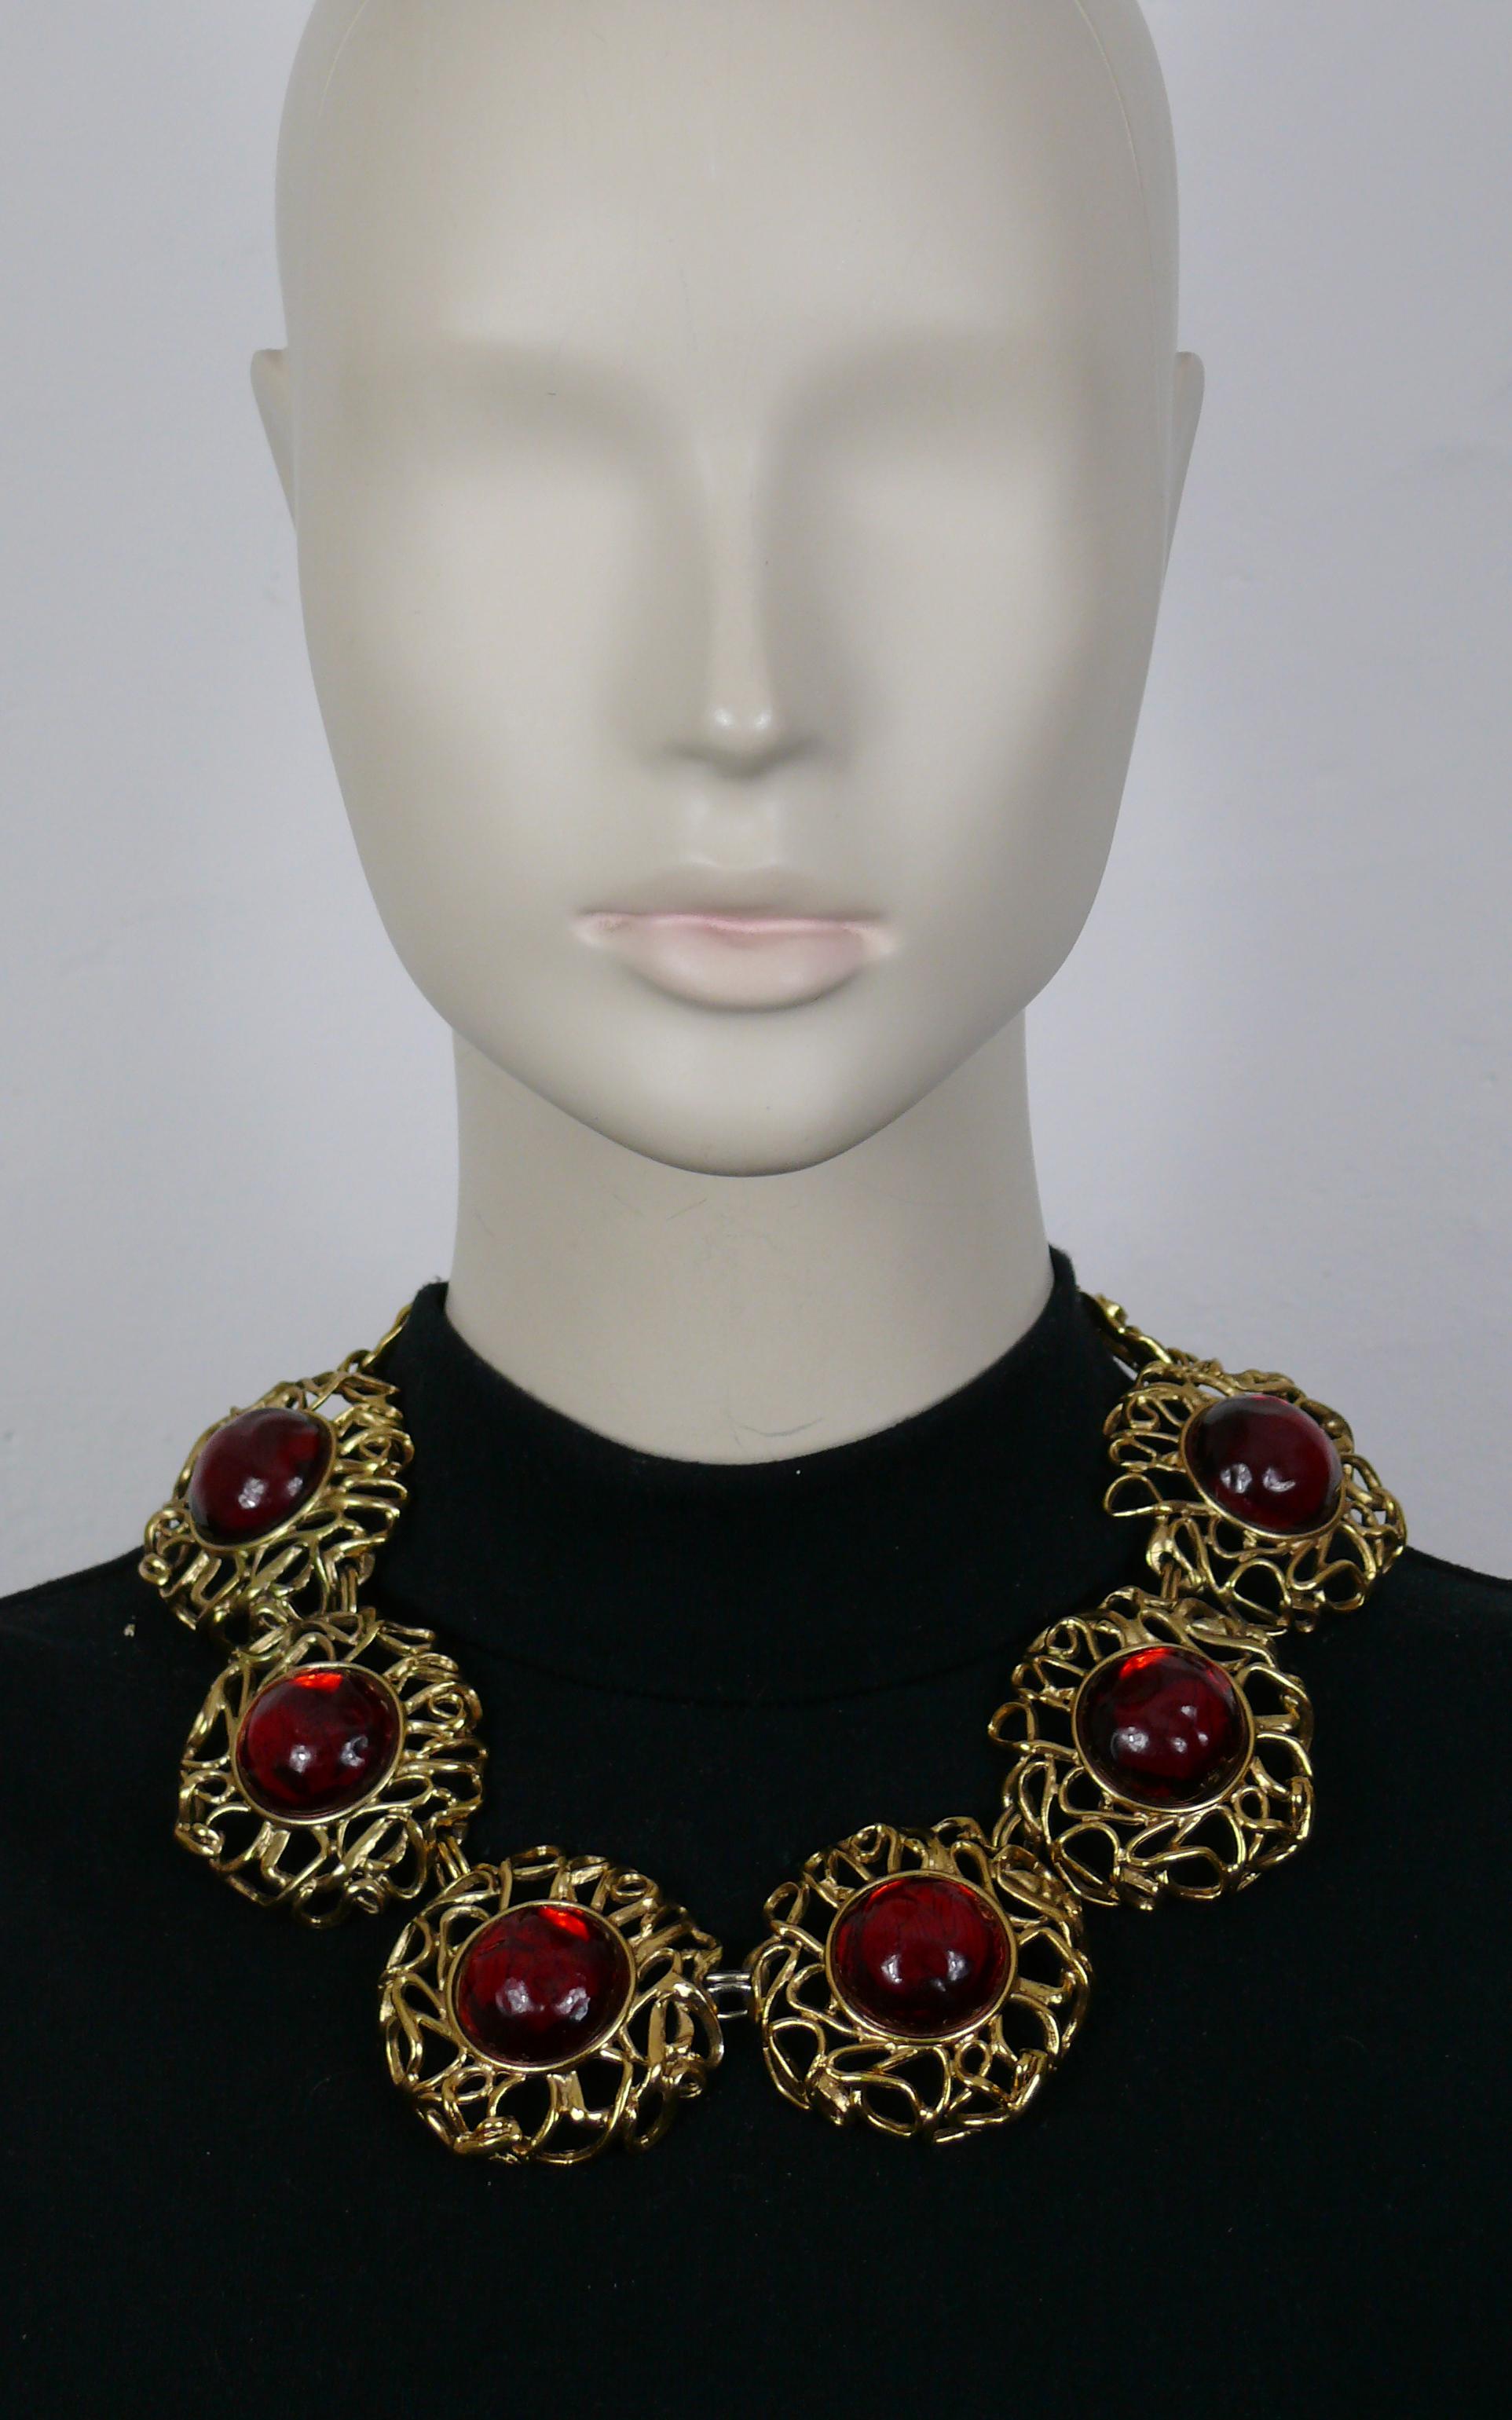 YVES SAINT LAURENT vintage gold tone necklace featuring large openwork round links embellished with irregular shaped red resin cabochons.

Adjustable hook clasp closure.

Embossed YVES SAINT LAURENT Rive Gauche Made in France.

Indicative